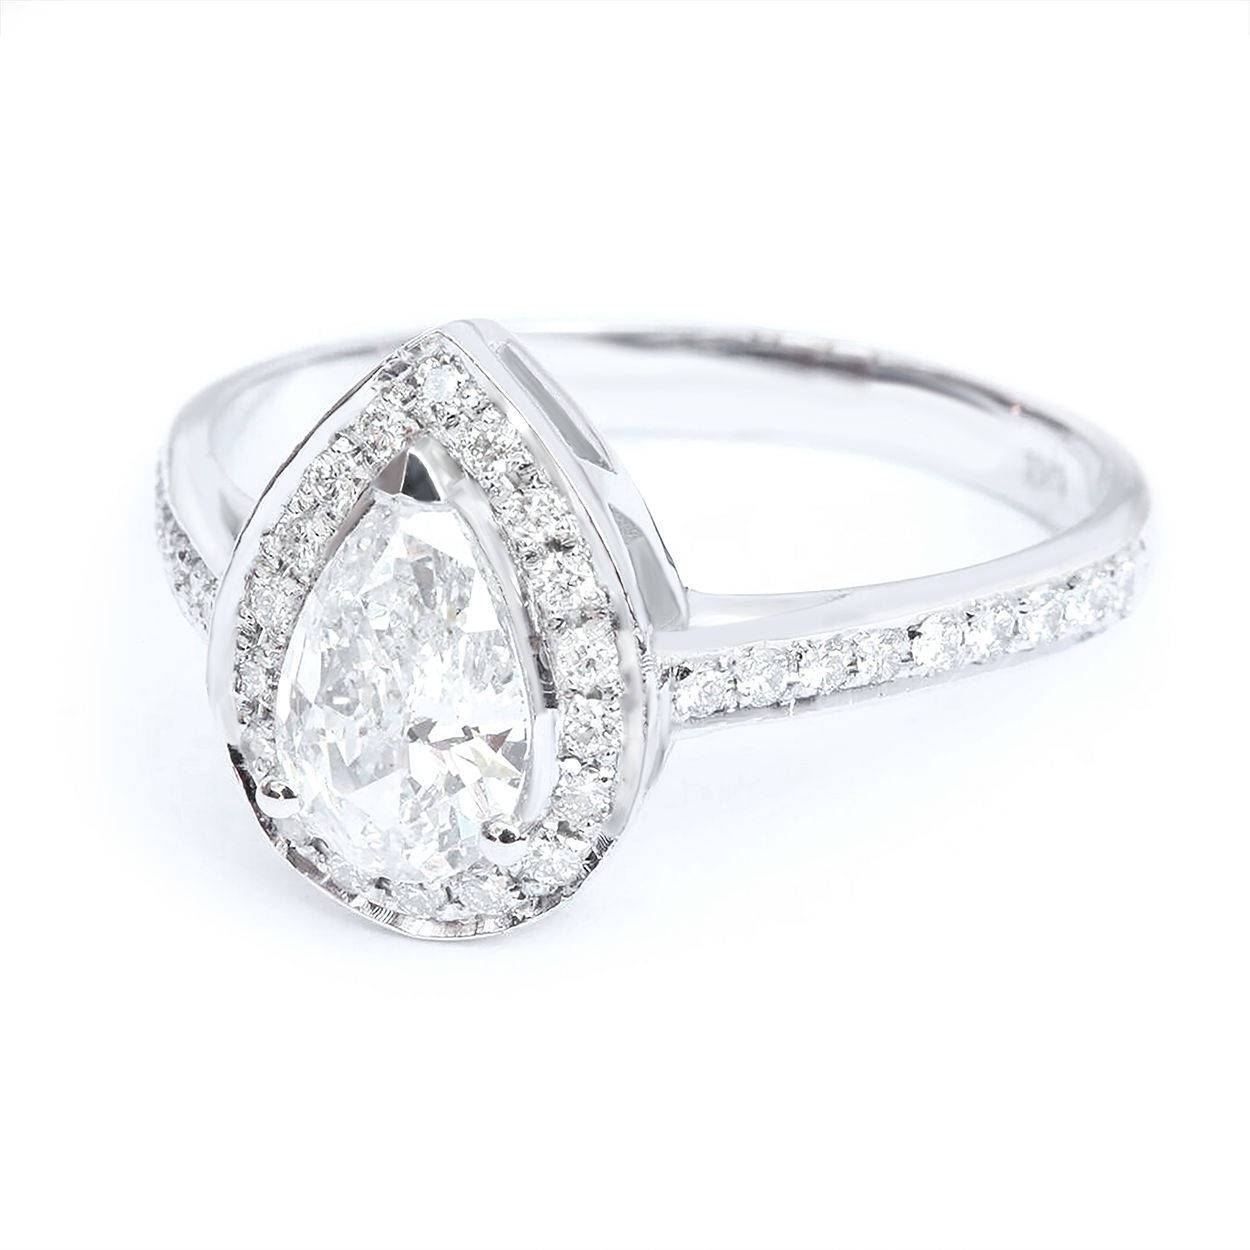 Pear Diamond Ring With One Matching Sideband, Wedding Two Rings Set  "Nia" & "Hermes"  ♥